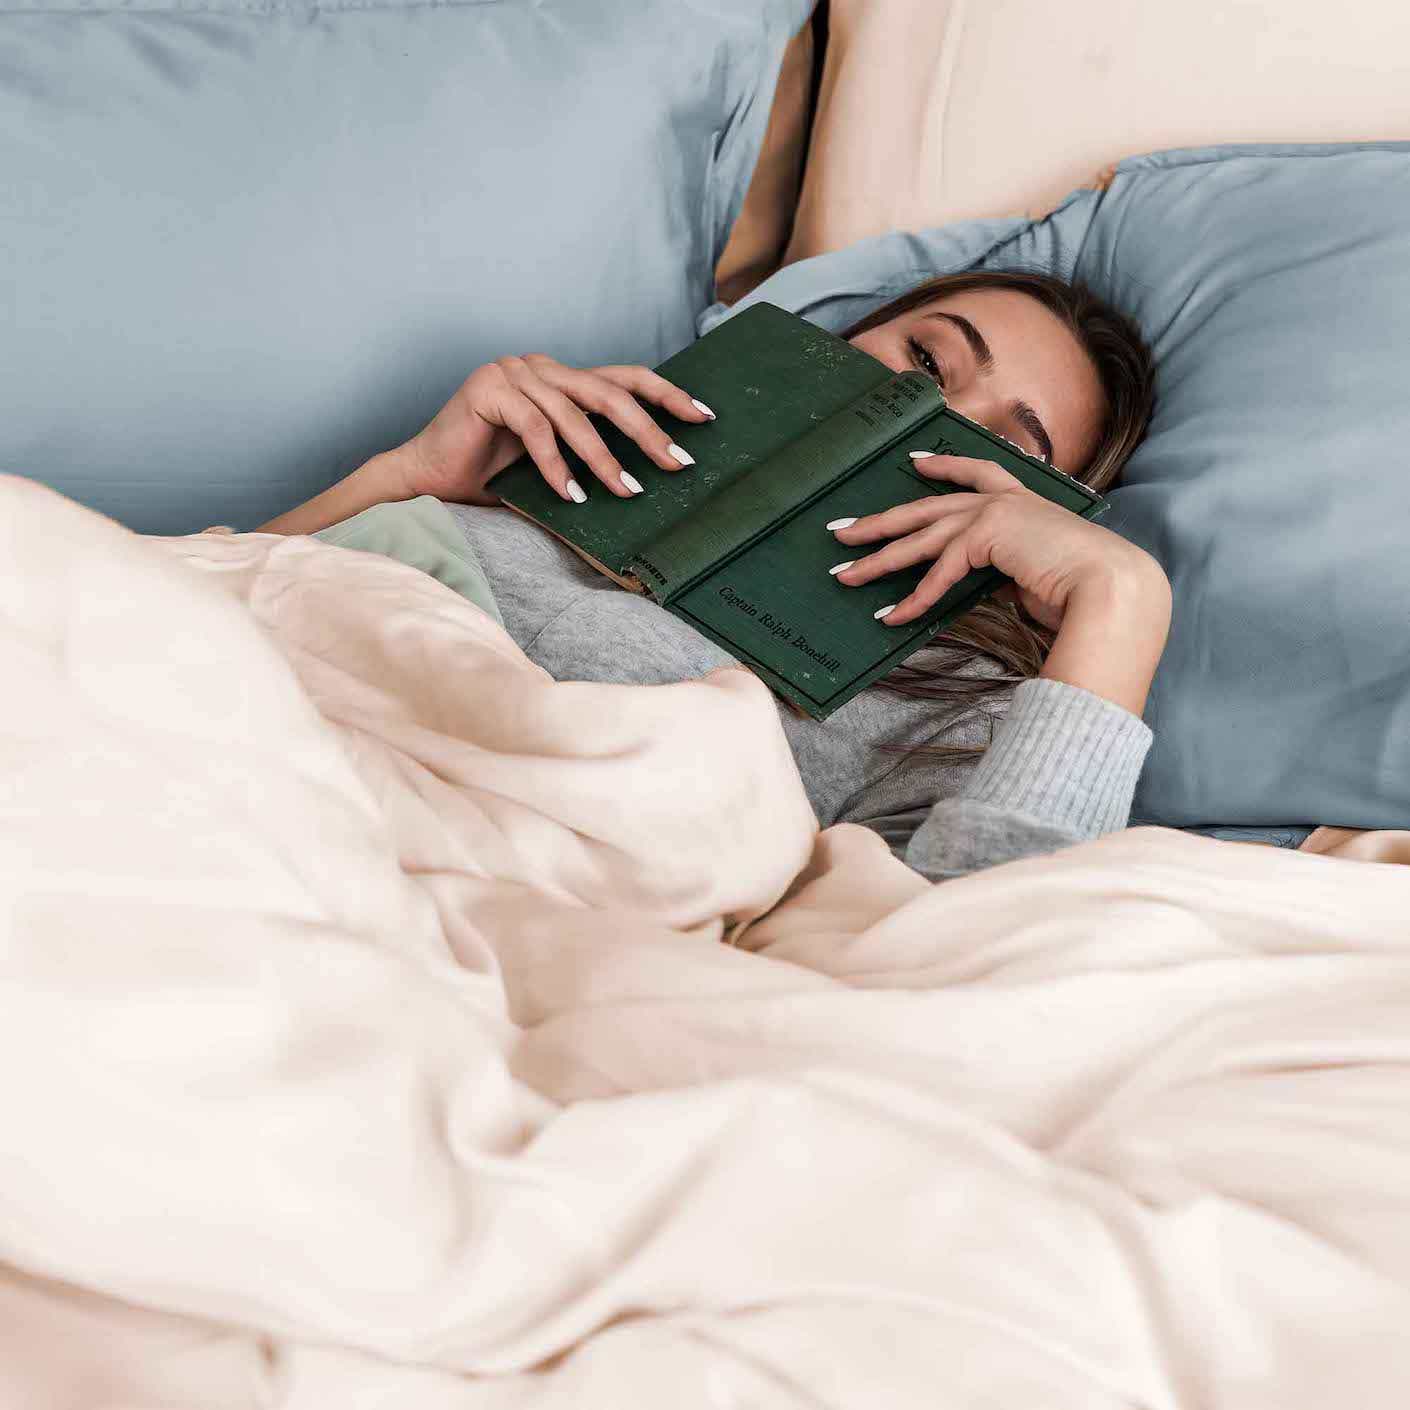 A woman in soft luxurious sheets relaxes with a book over her face.